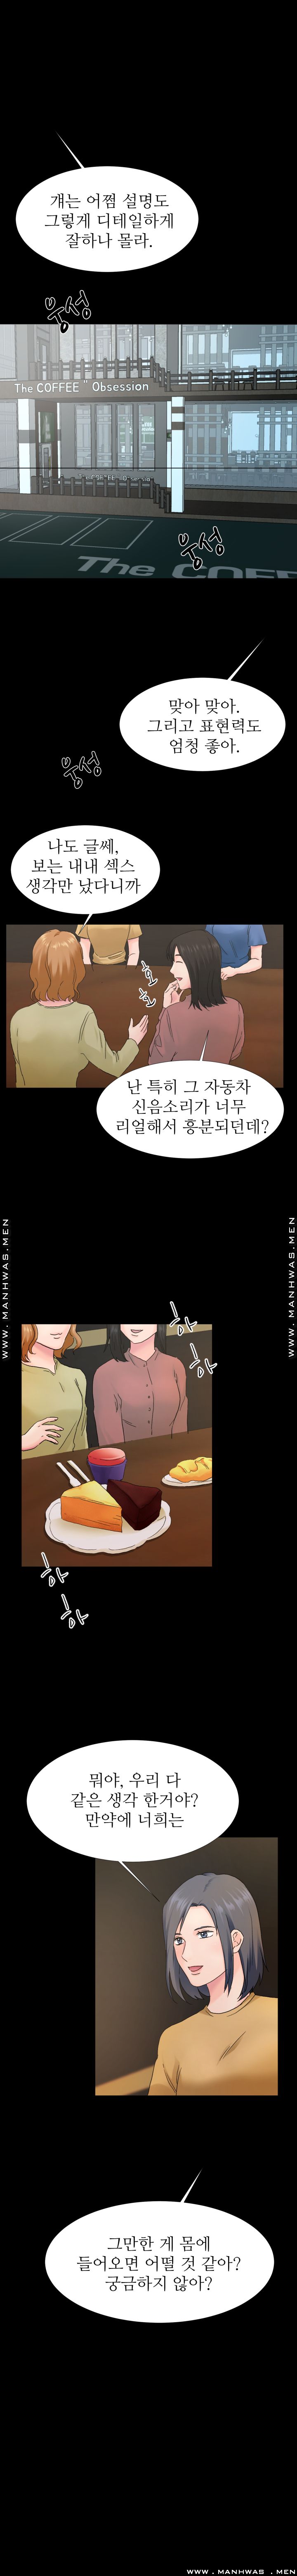 The Taste of Affair Raw - Chapter 1 Page 9